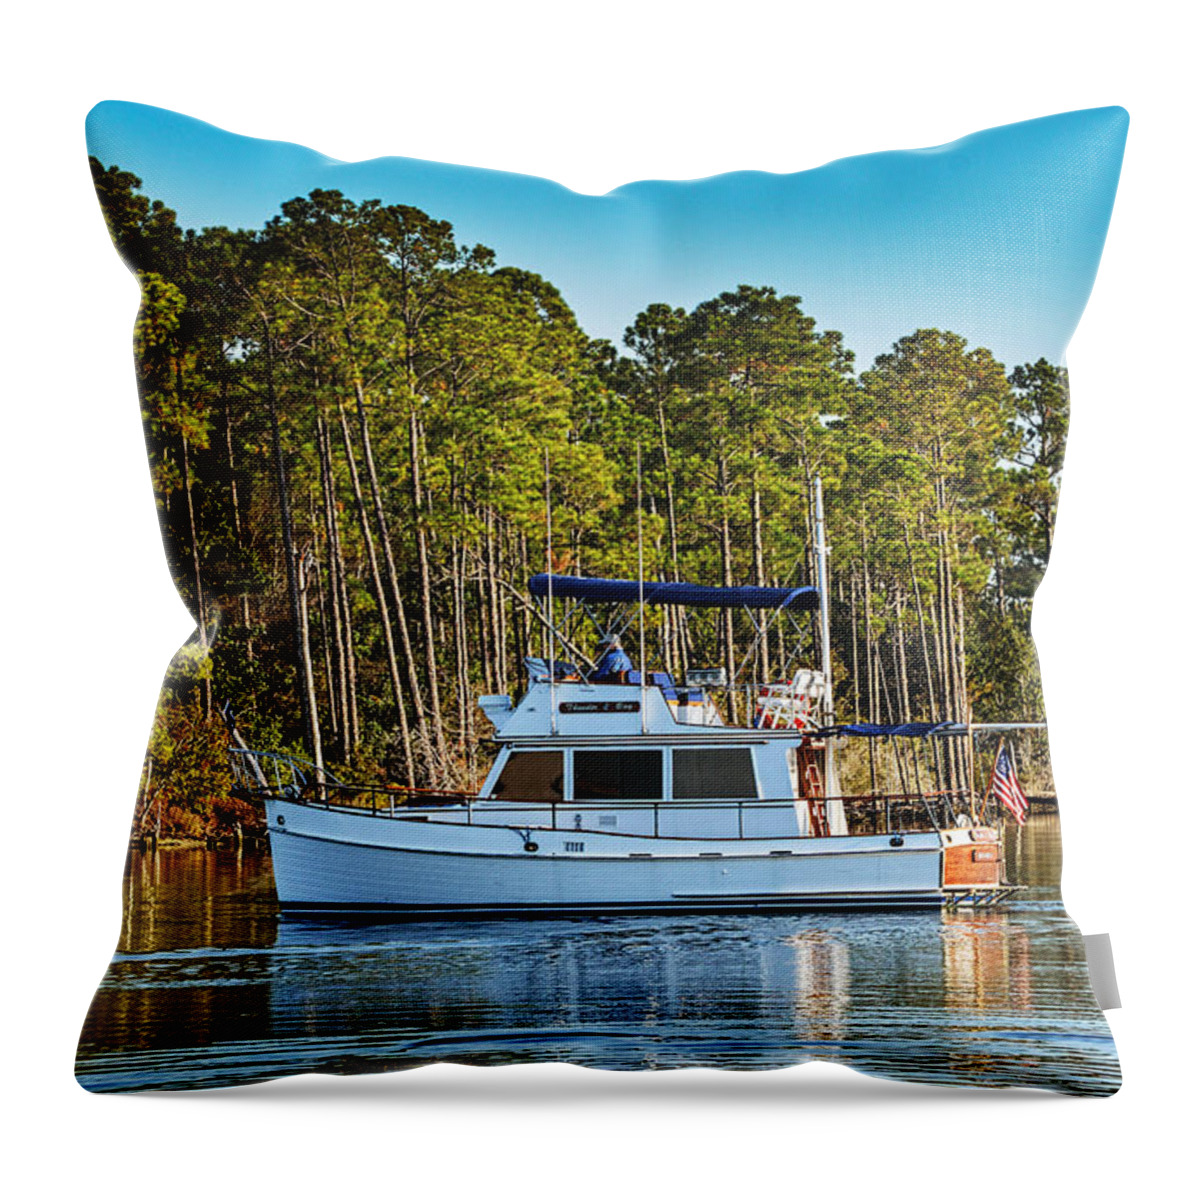 Thunder Bay Throw Pillow featuring the photograph Thunder Bay by Michael Thomas